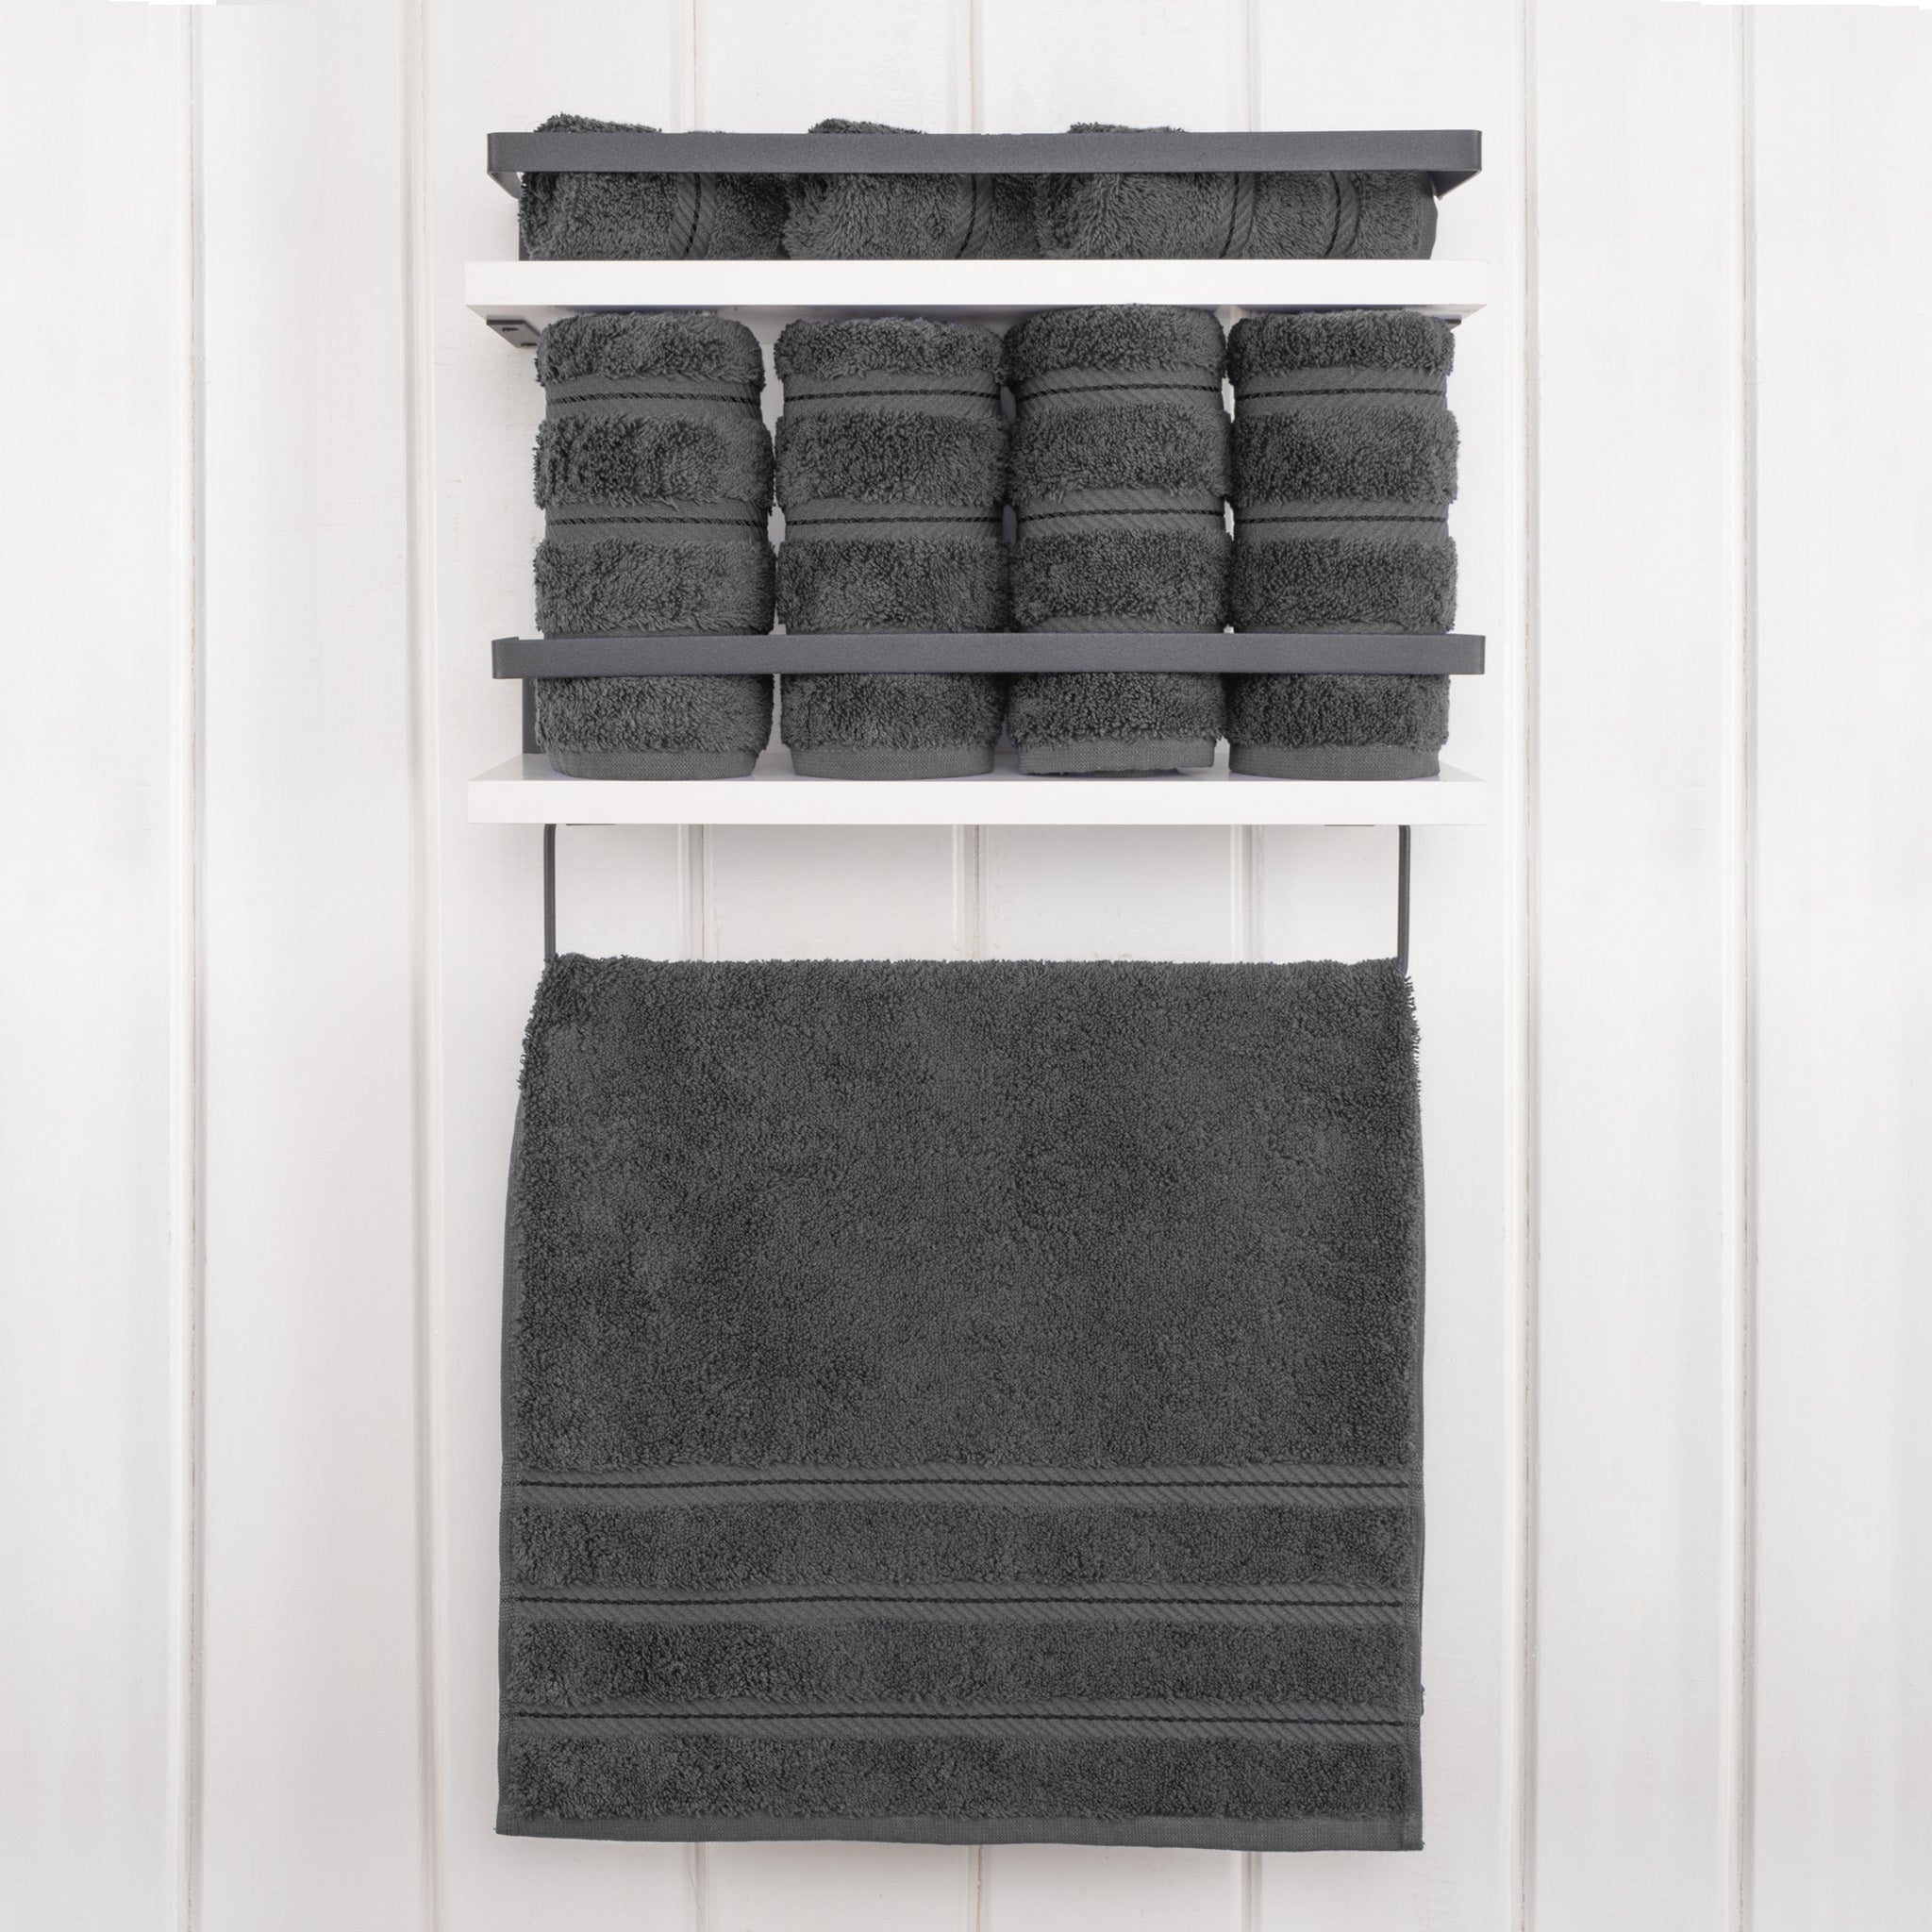 Hawmam Linen Black Hand Towels 4-Pack - 16 x 29 Turkish Cotton Premium  Quality Soft and Absorbent Small Towels for Bathroom